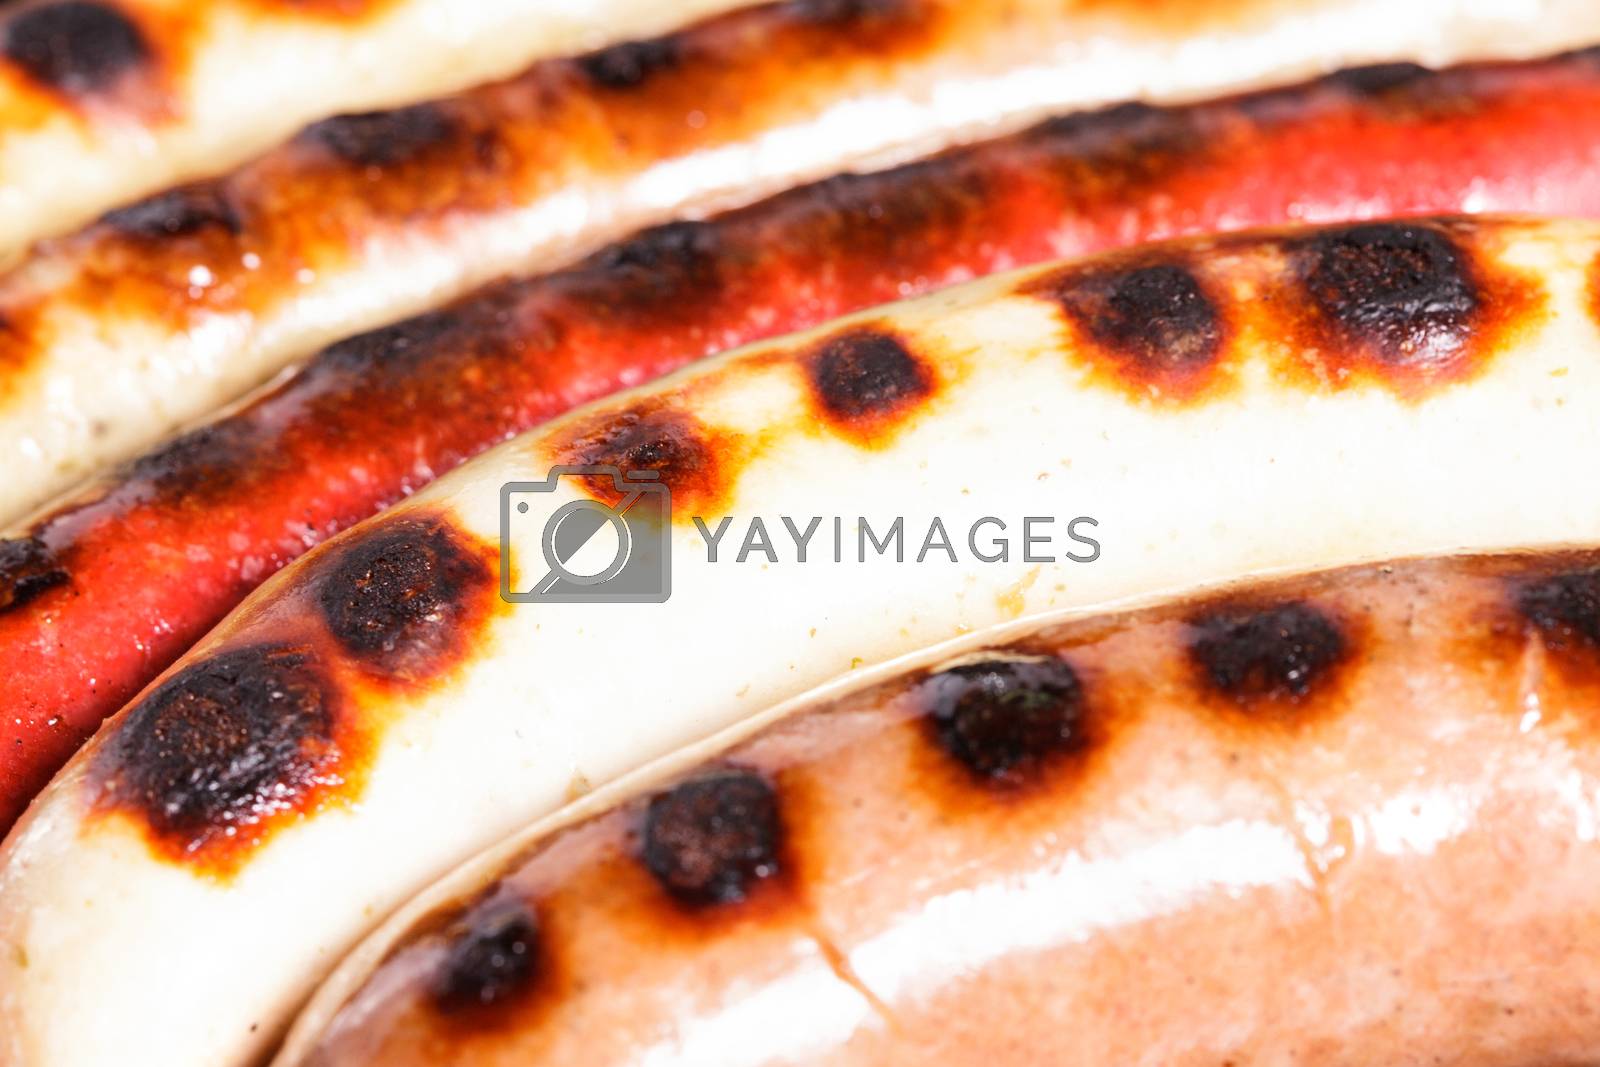 Royalty free image of Closeup shot of sausages on a grill by Nobilior